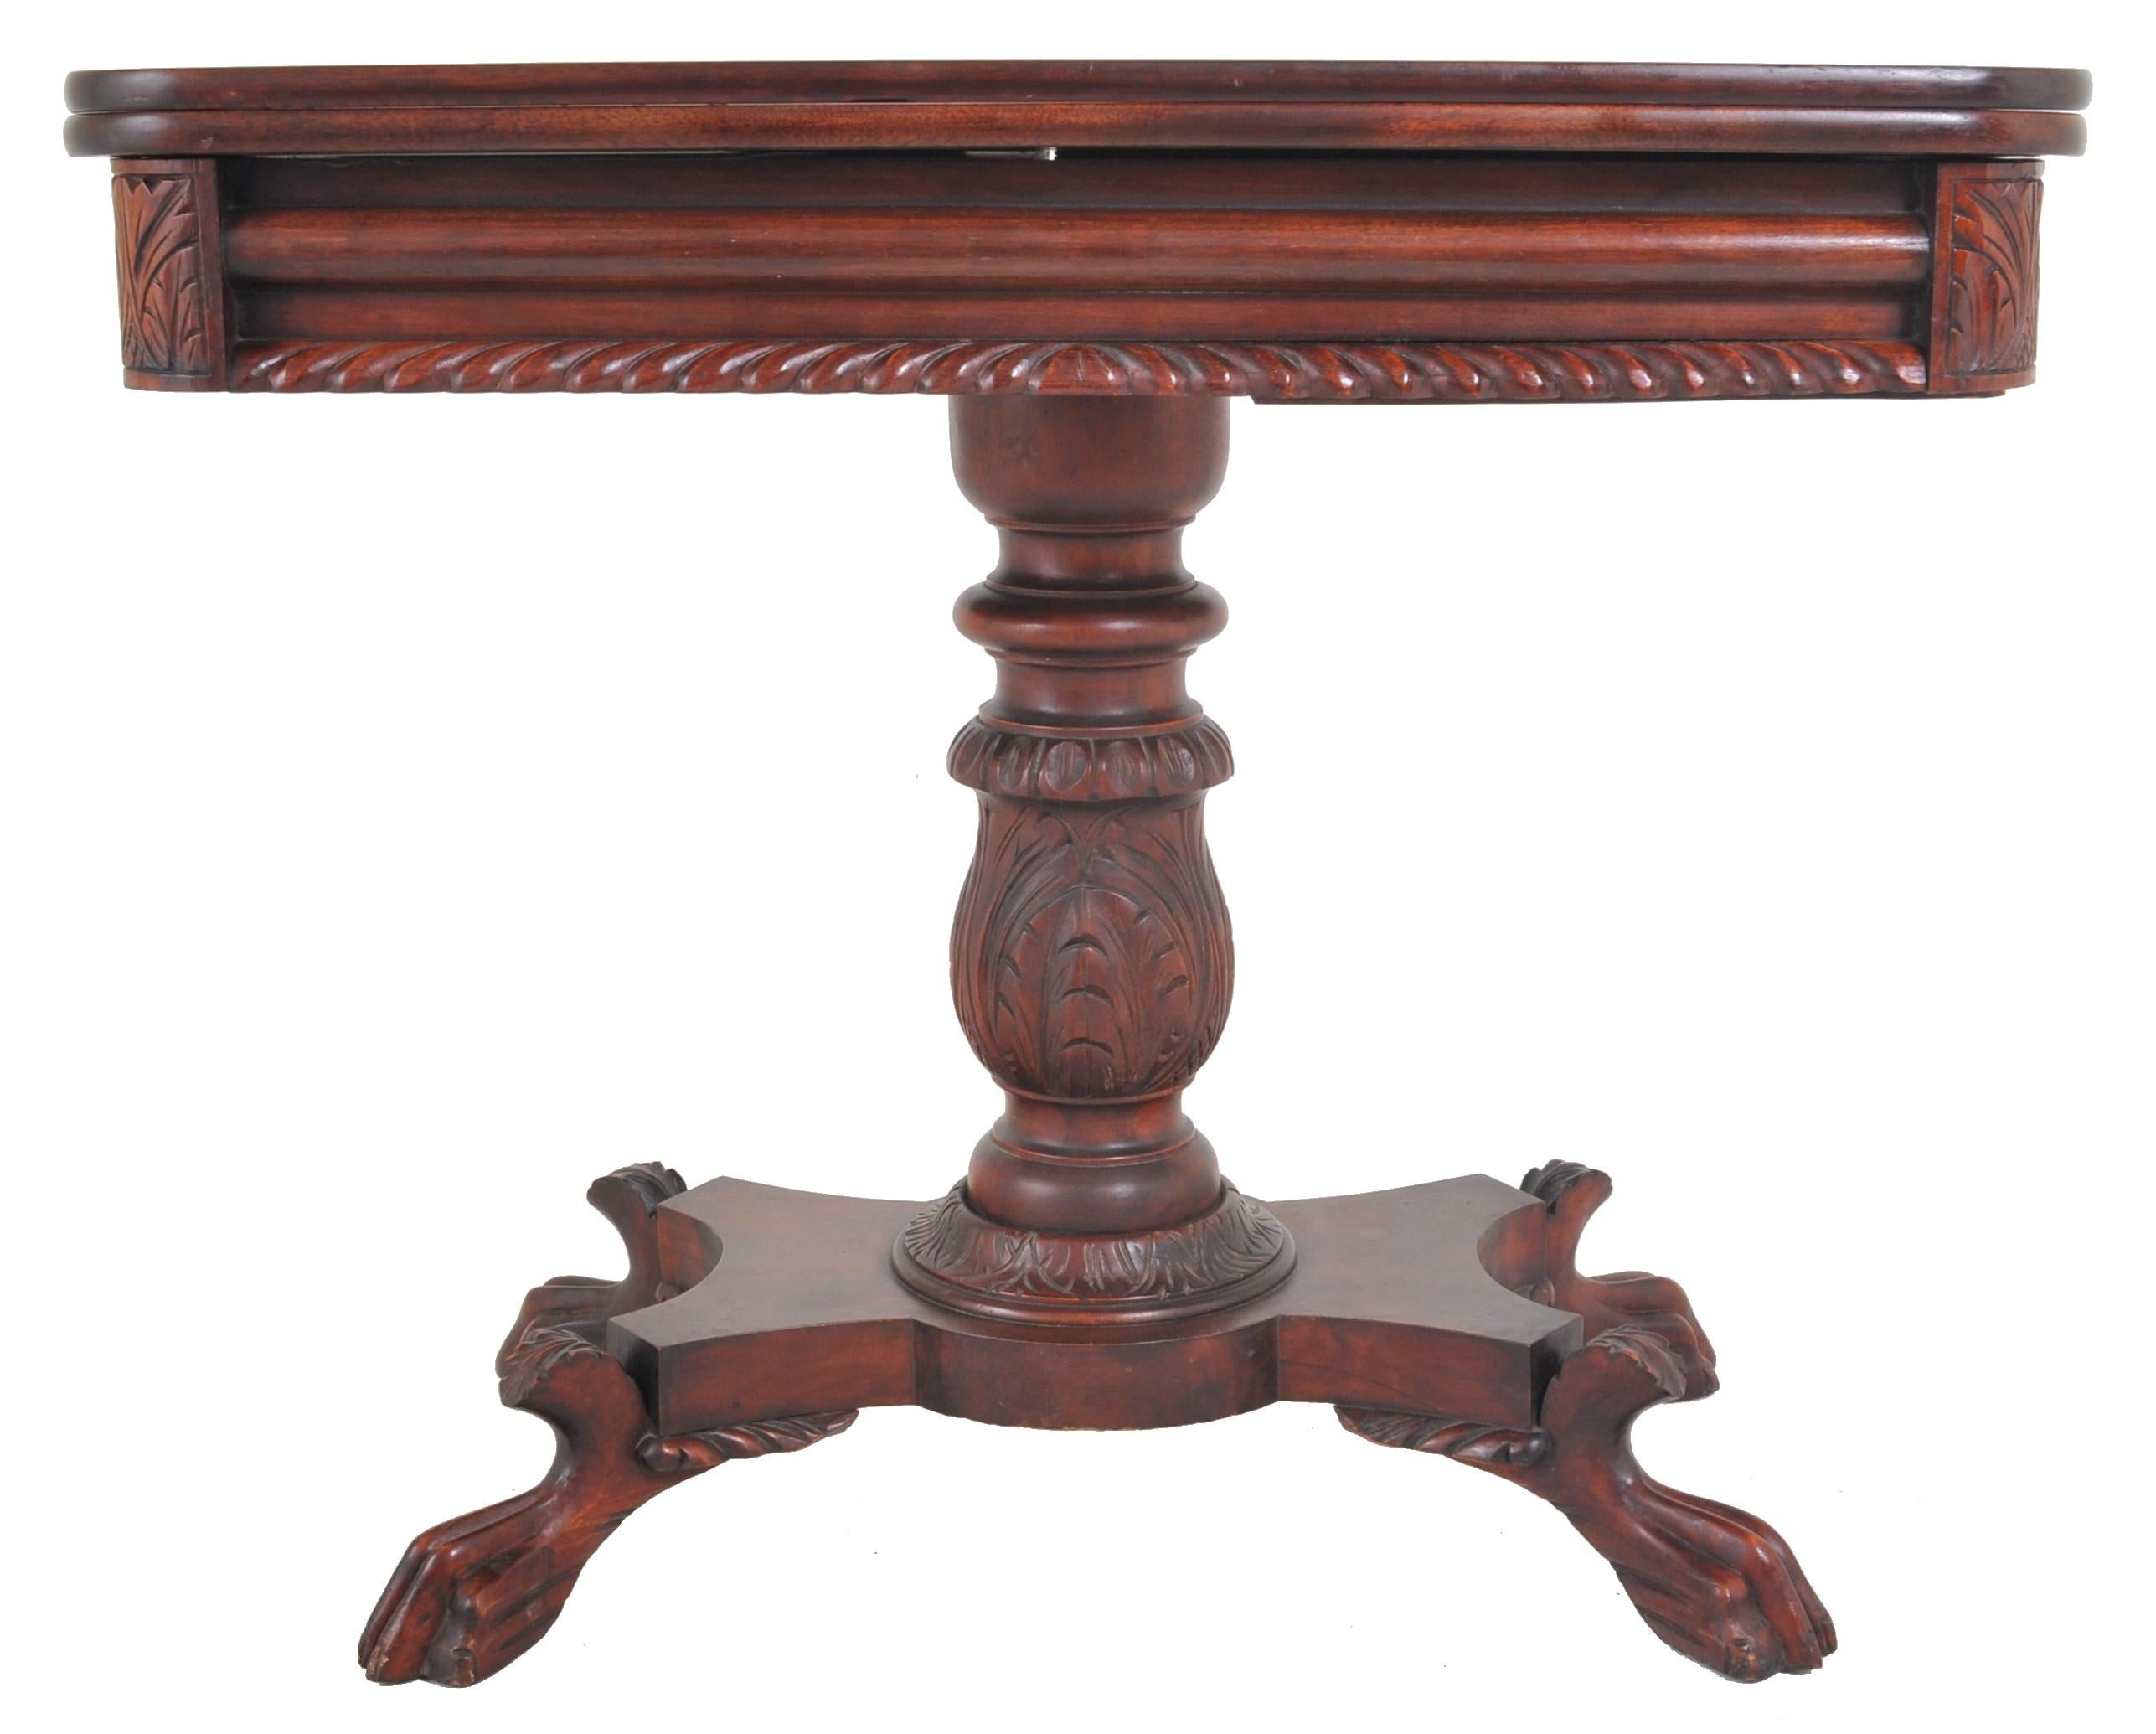 American late federal/empire mahogany fold-over tea/games/card table, circa 1830. The table having a fold-over & swivel top, below is a carved and gadrooned skirt. The table standing on a turned and carved pedestal with four Zoomorphic feet. Most